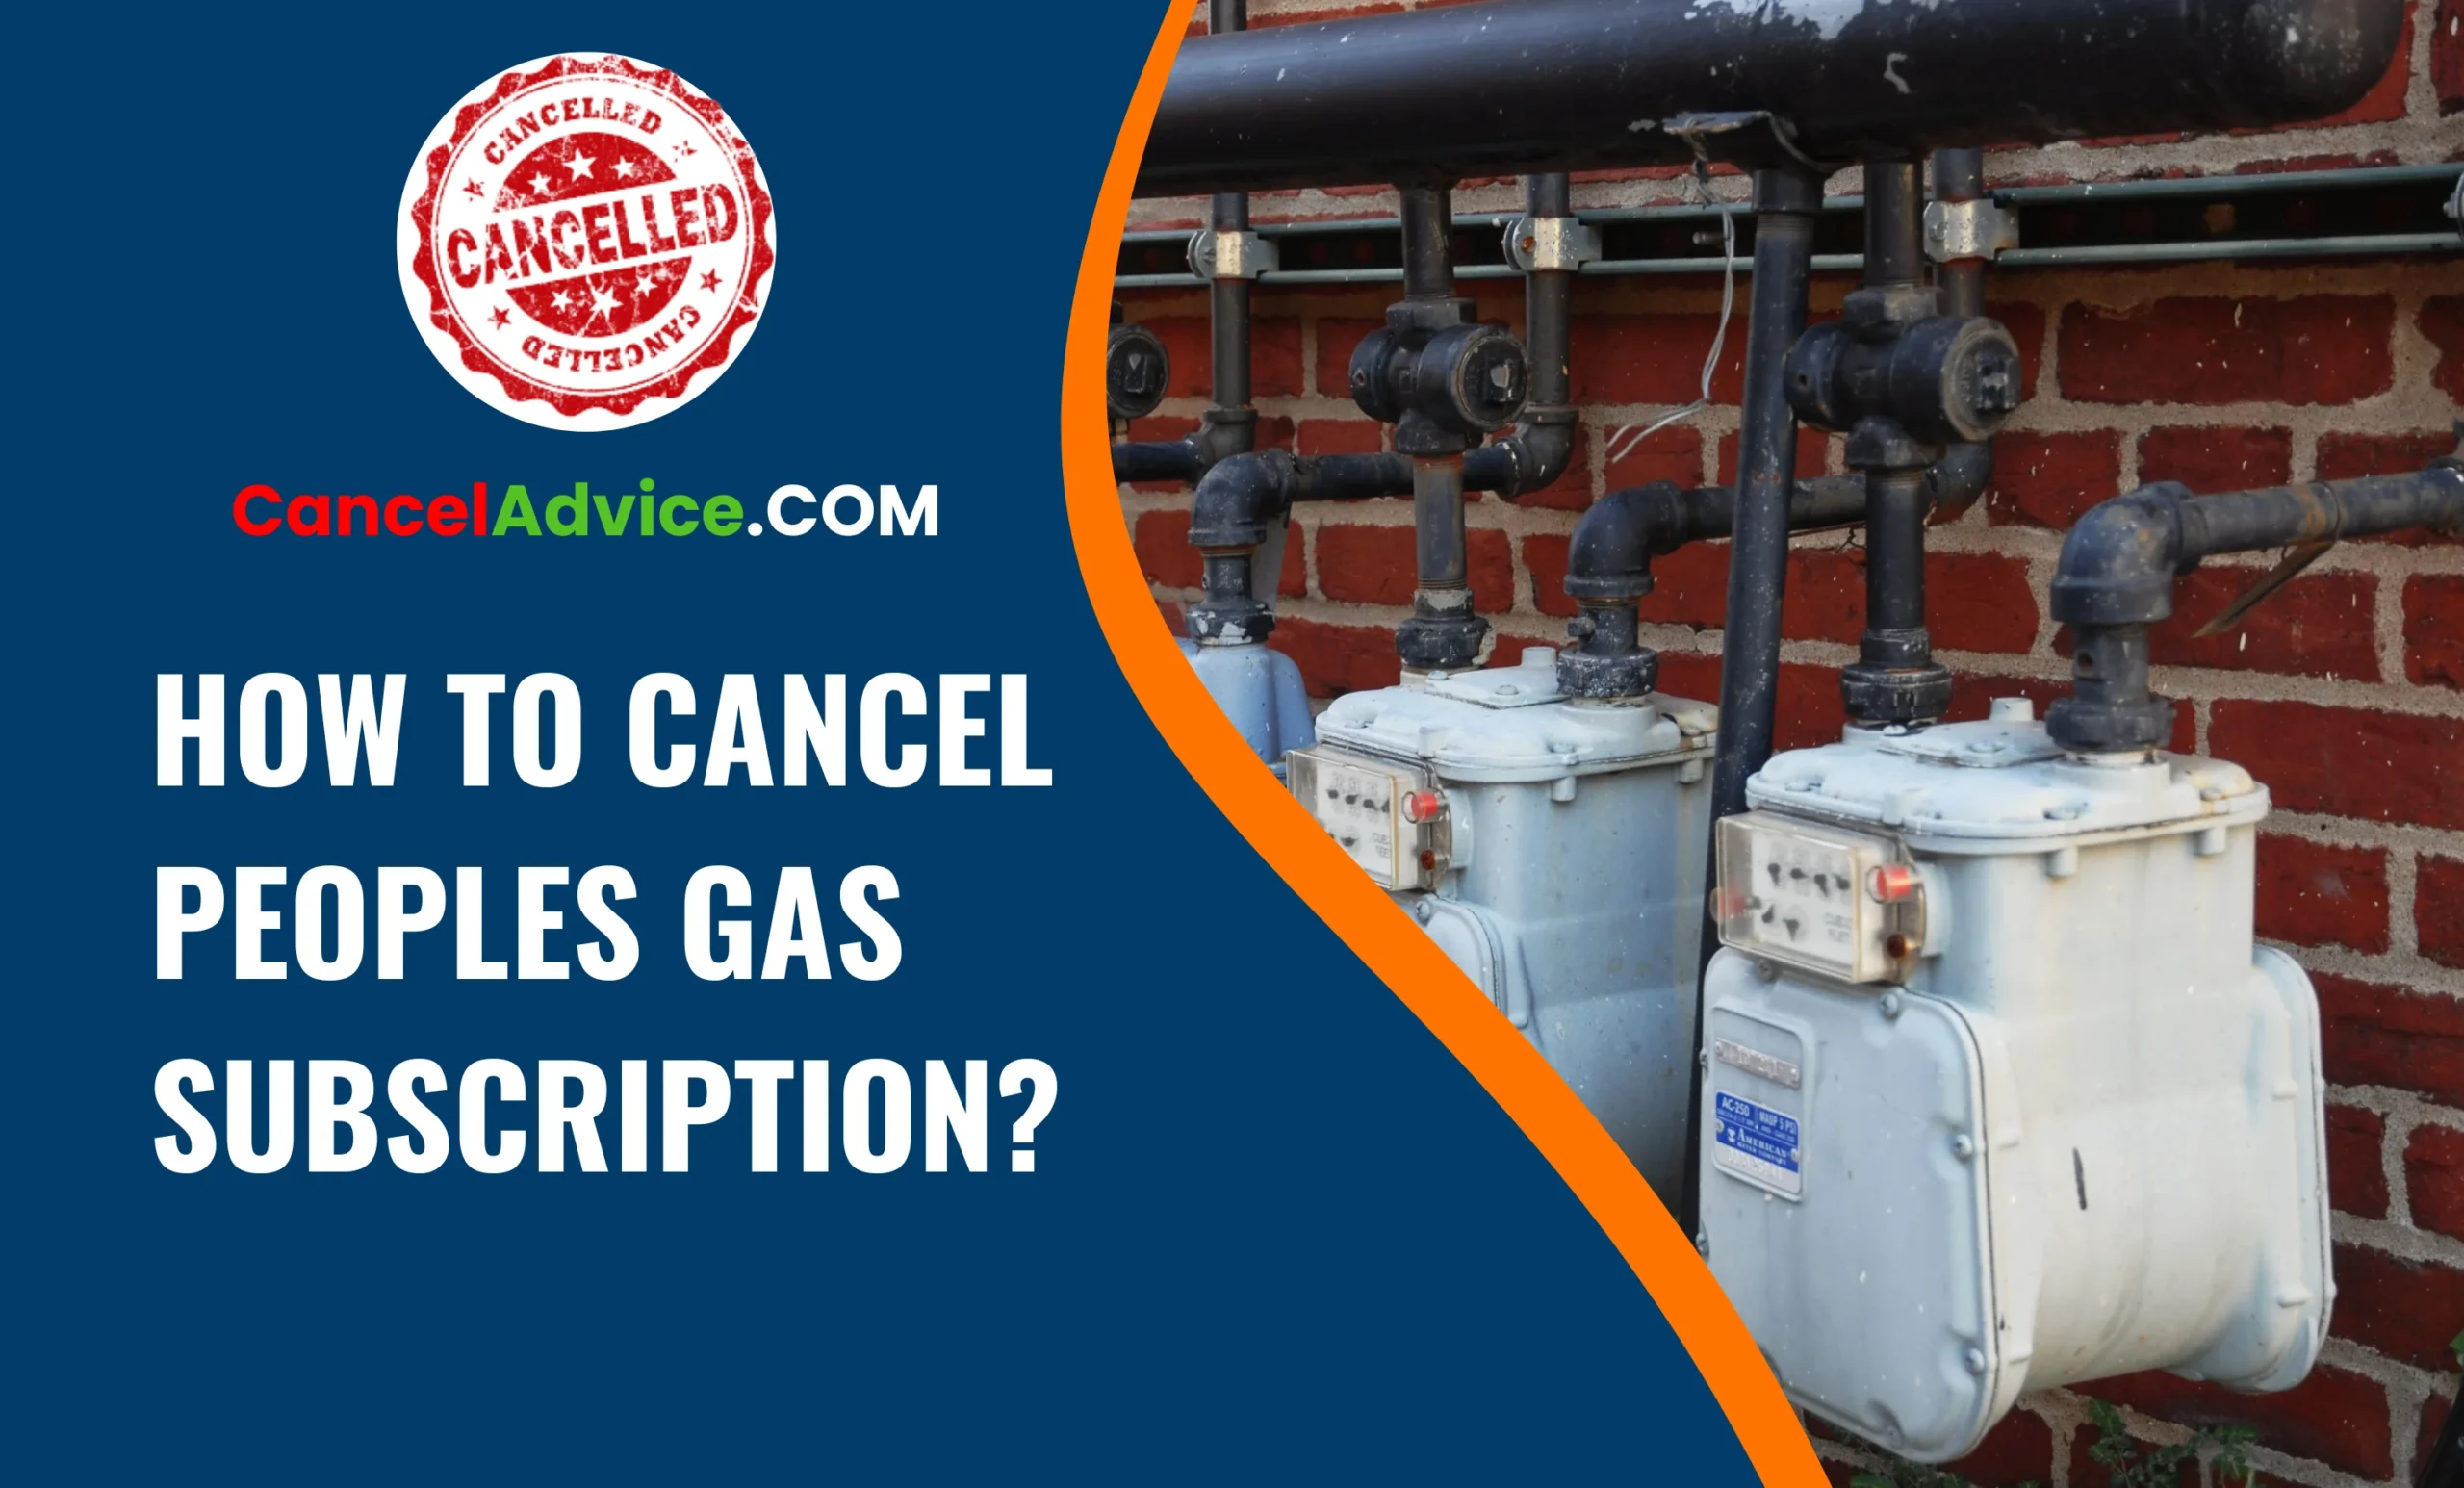 How To Cancel Peoples Gas Subscription